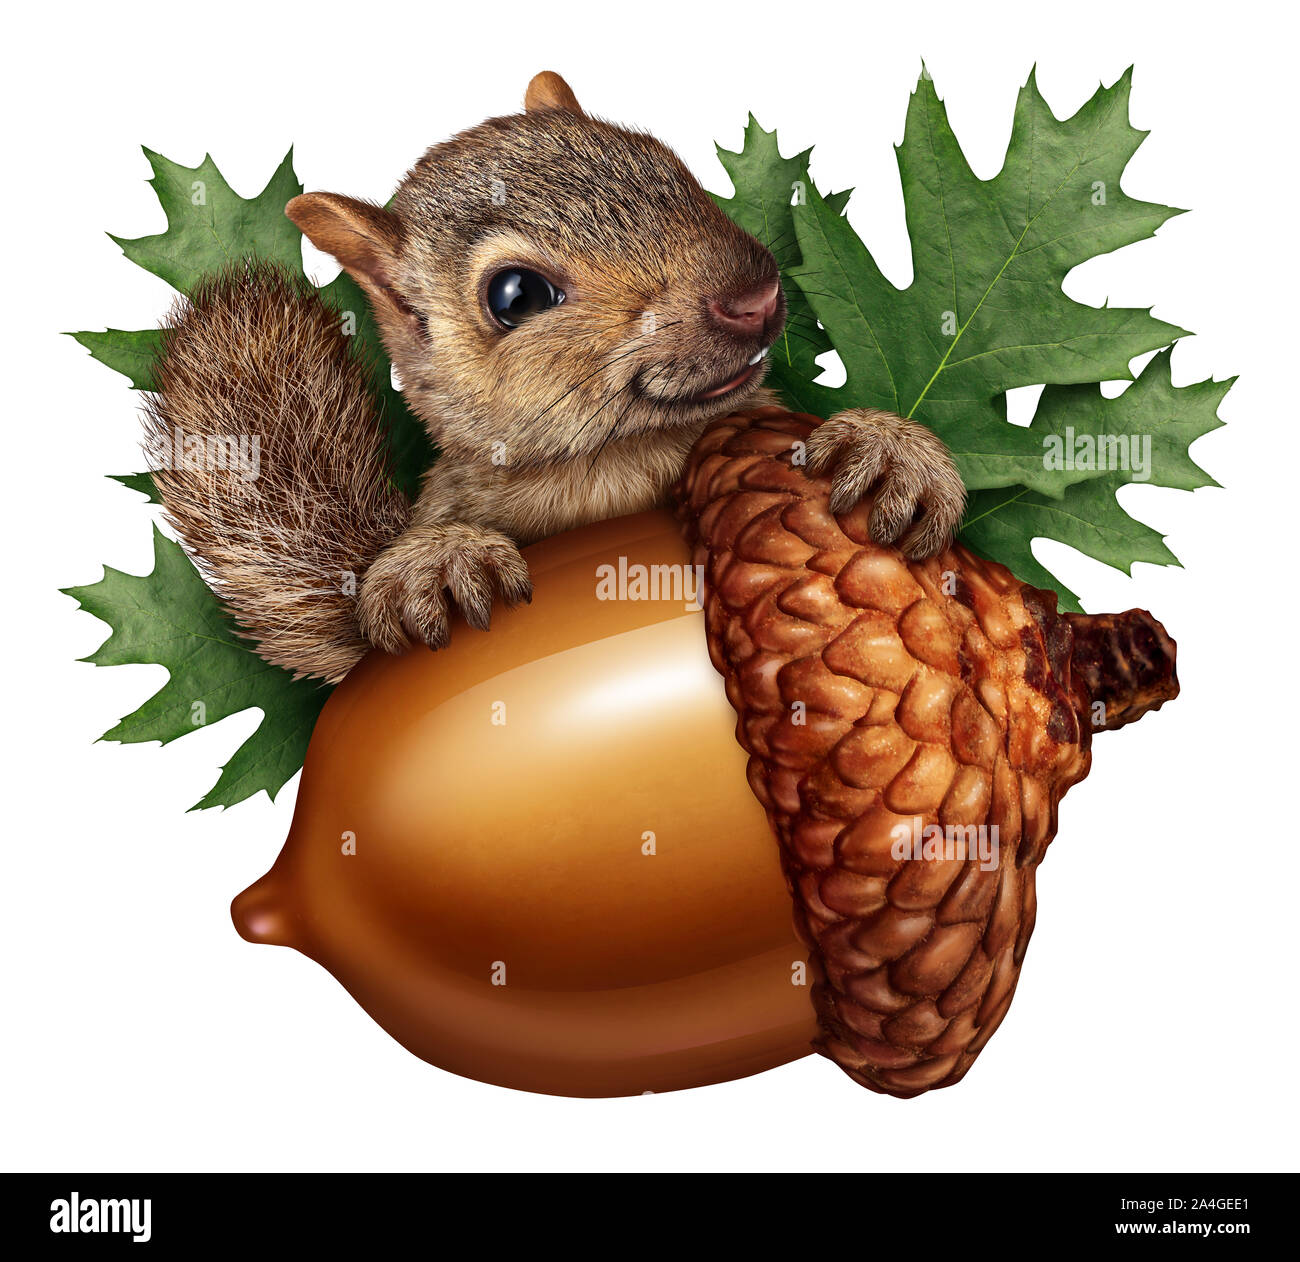 Squirrel and nuts images